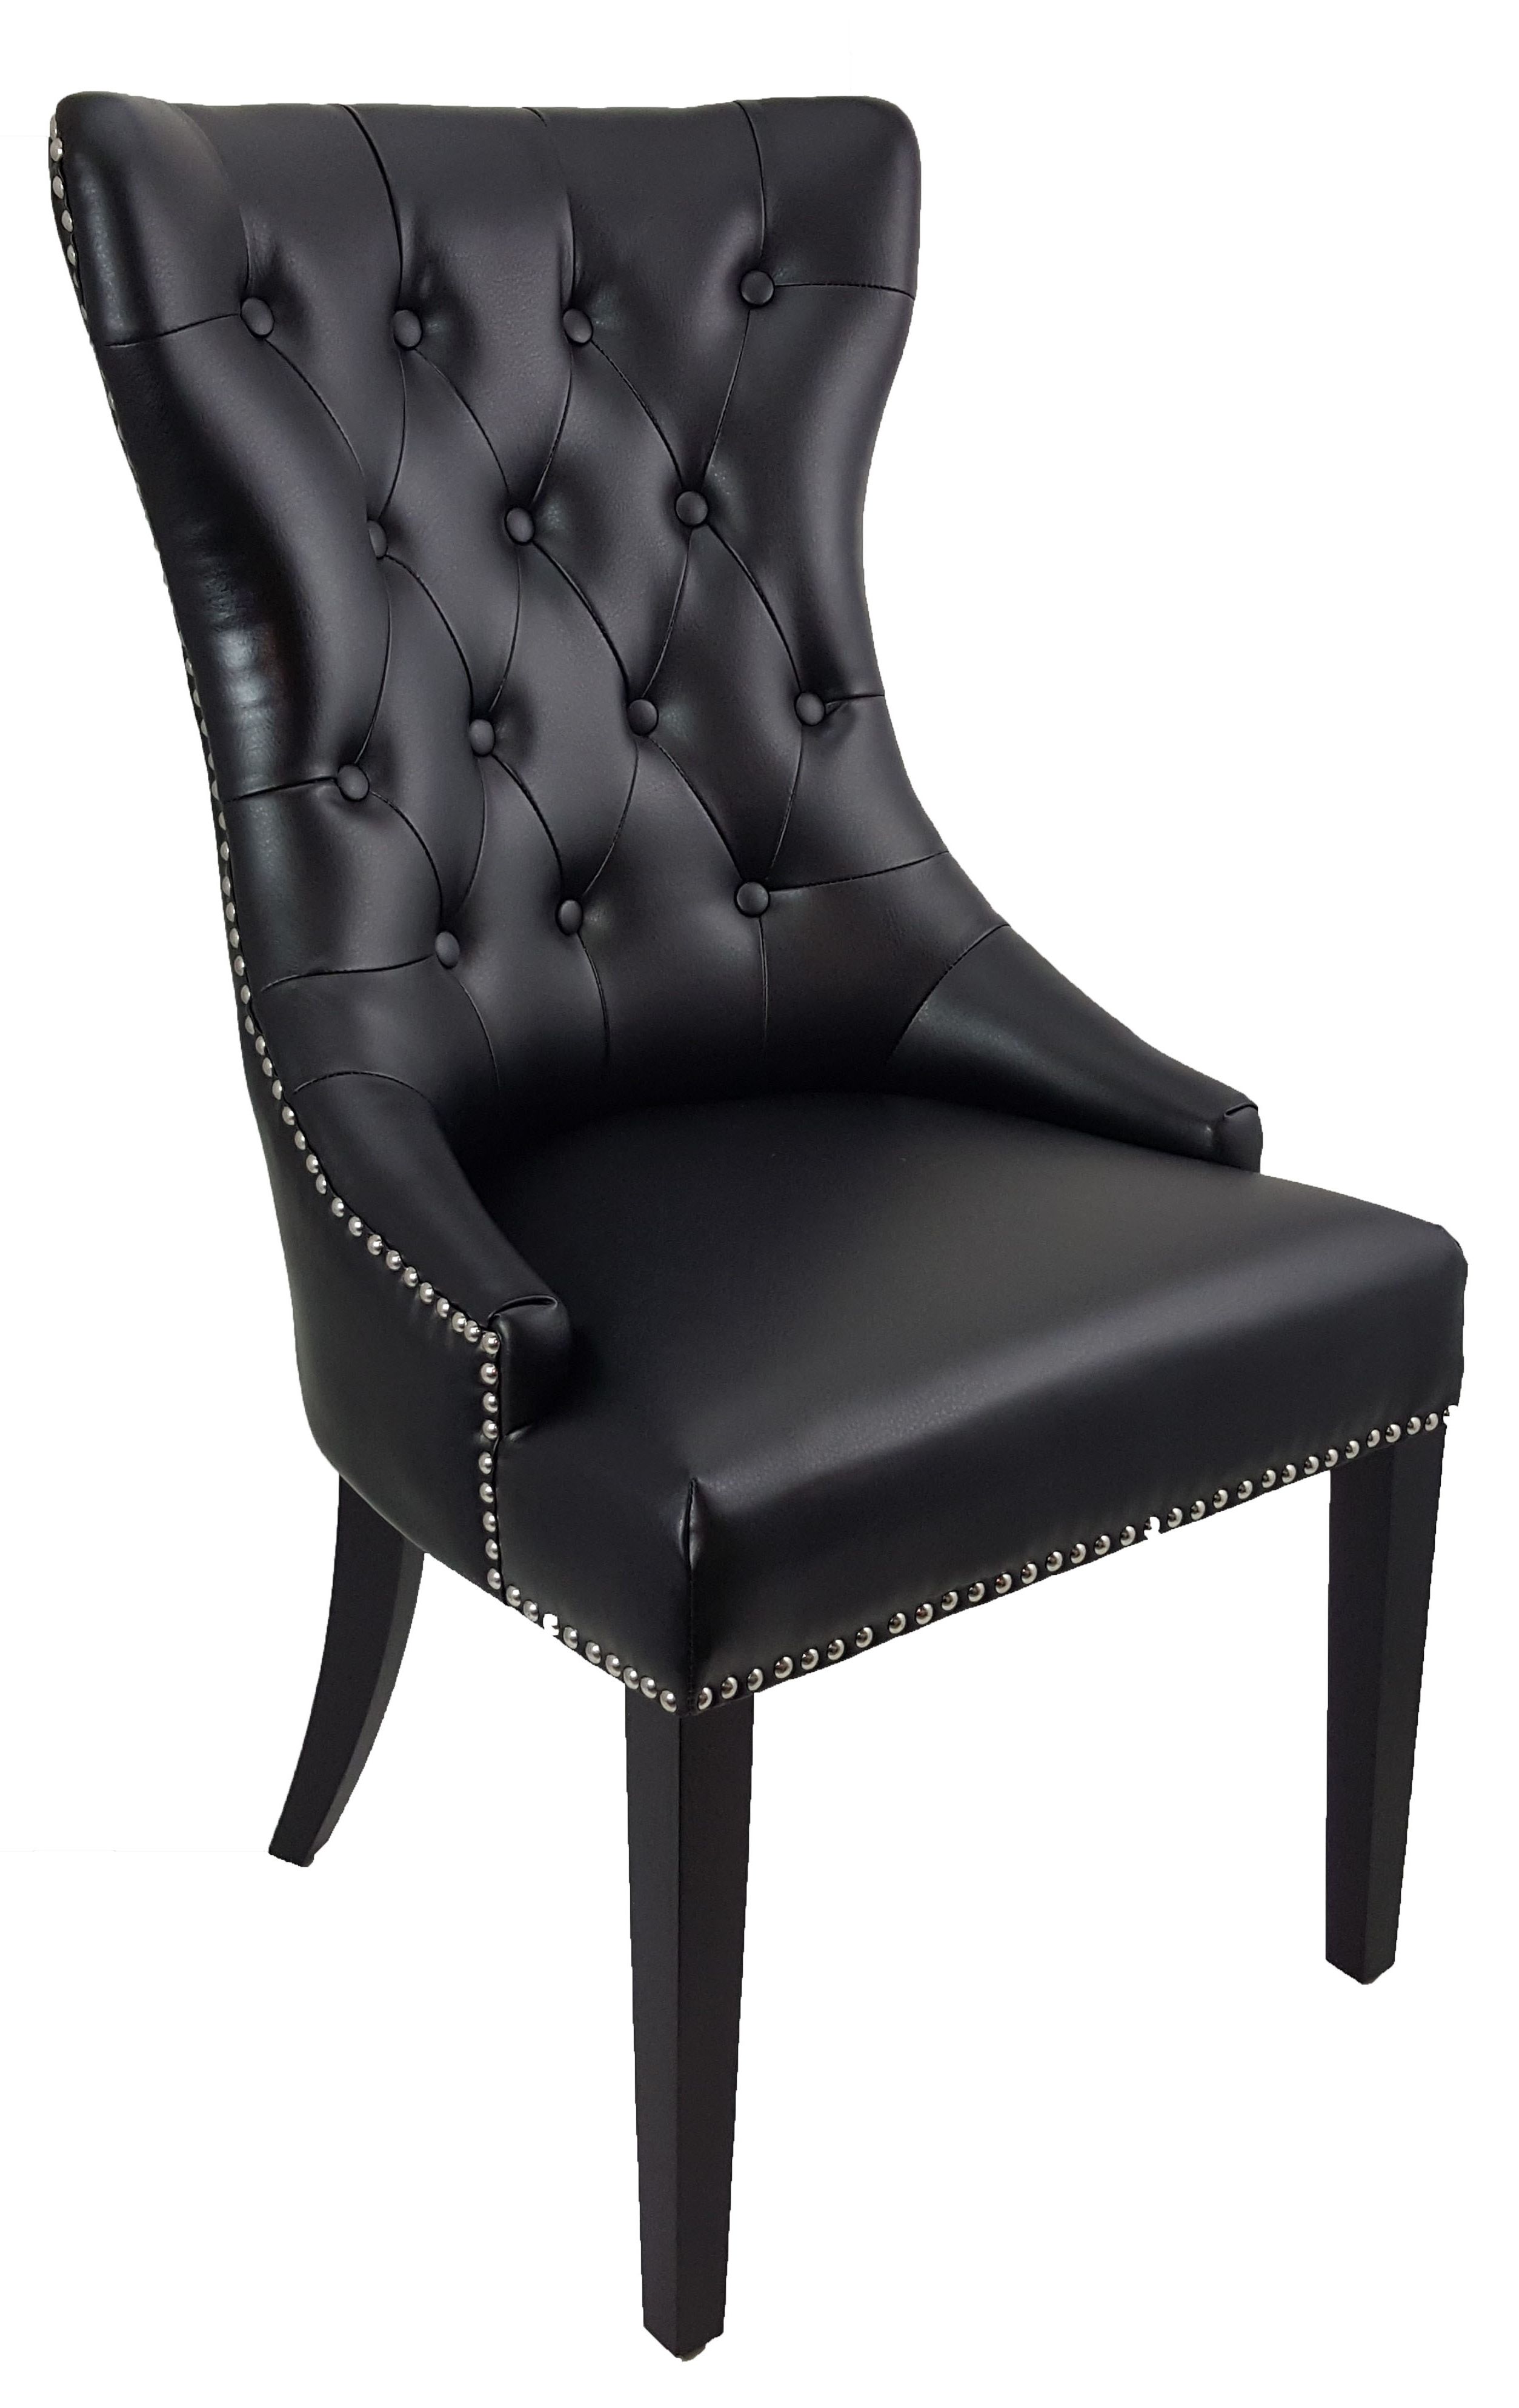 Chairs :: Accent Chairs :: Black Tufted High Back Accent Leather Inside Famous High Back Leather Dining Chairs (View 23 of 25)